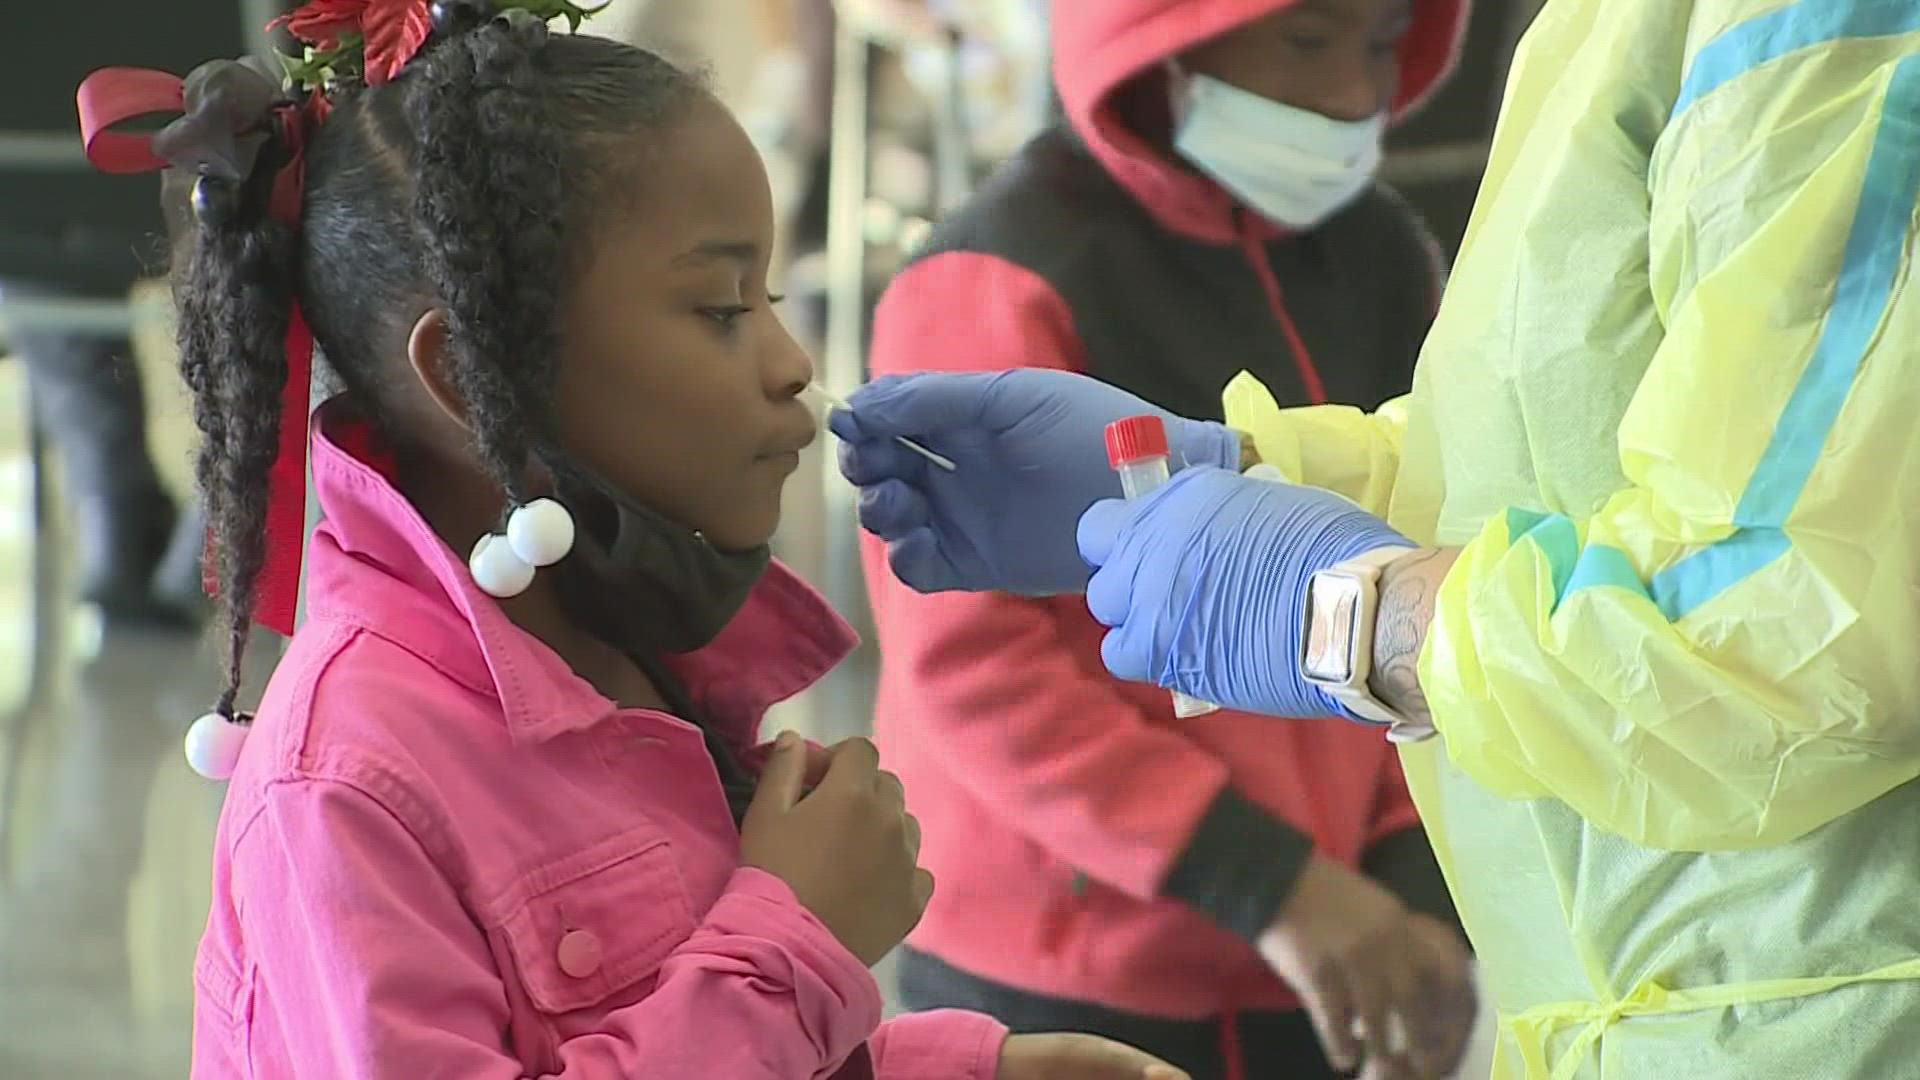 The increase in younger patients at Children's Hospital comes as classes resume at NOLA Public Schools.